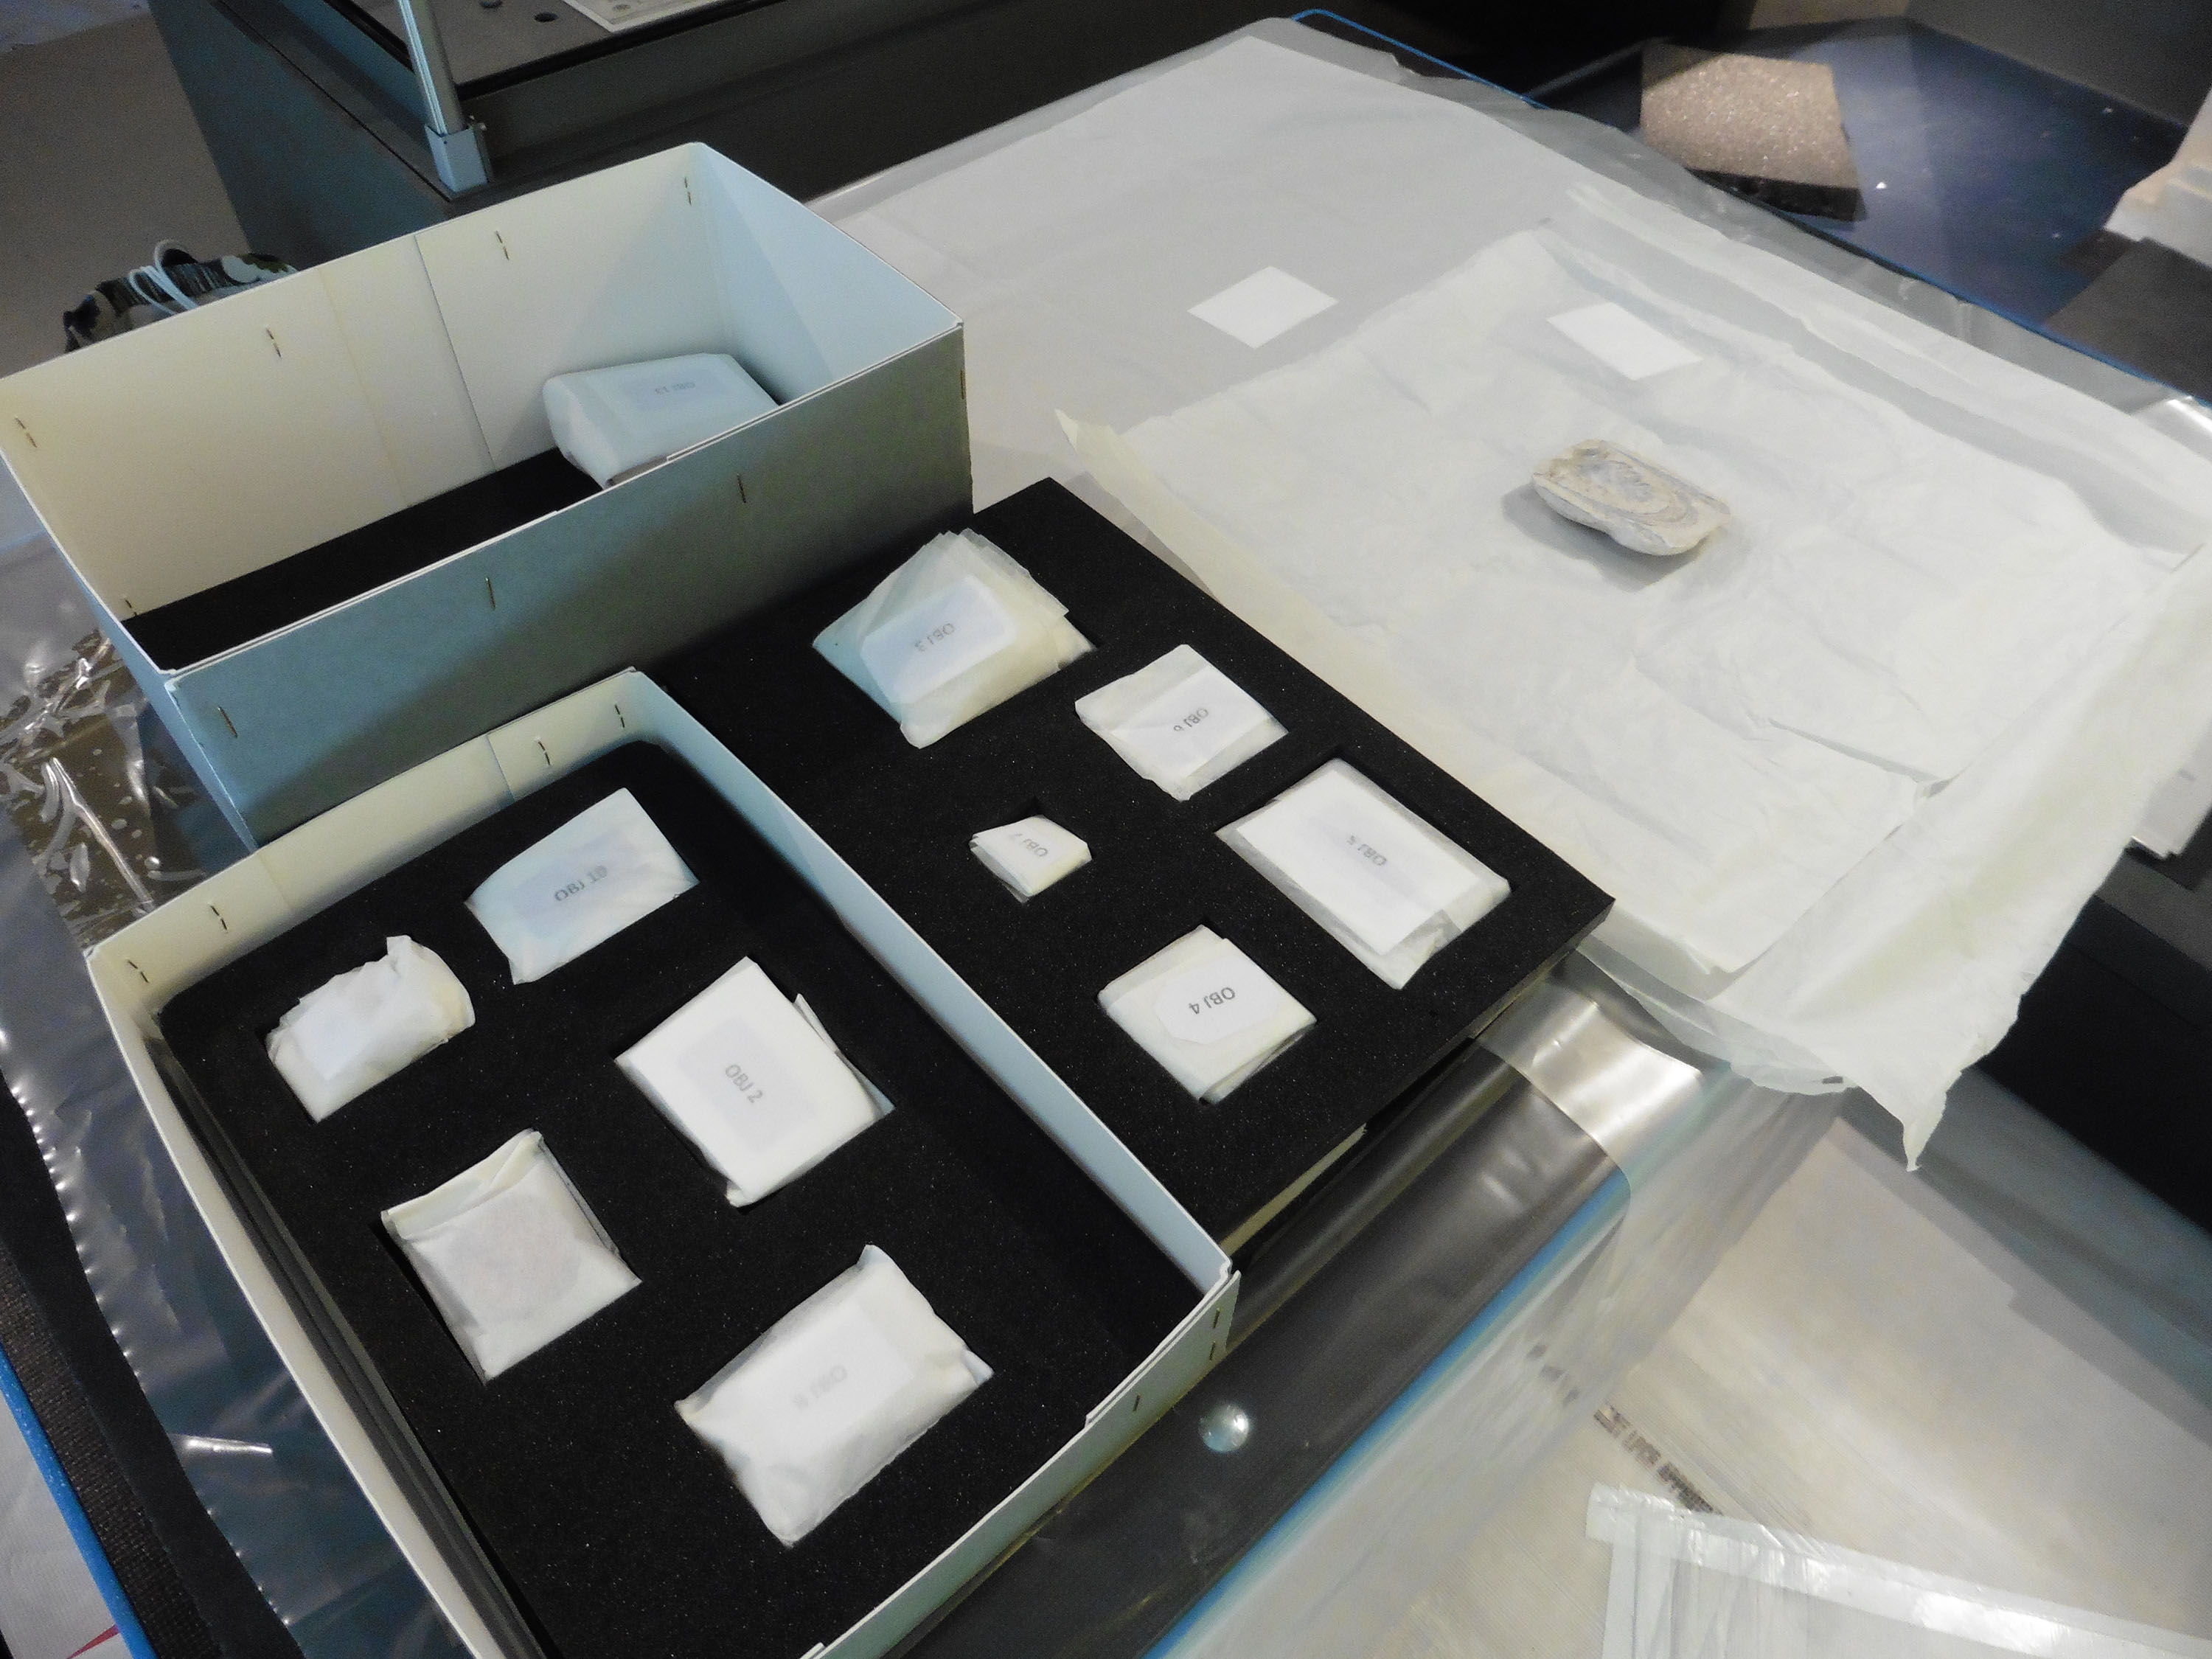 A box of objects is being unpacked on to a table at a museum. Each object is individually numbered and wrapped in white protective material.